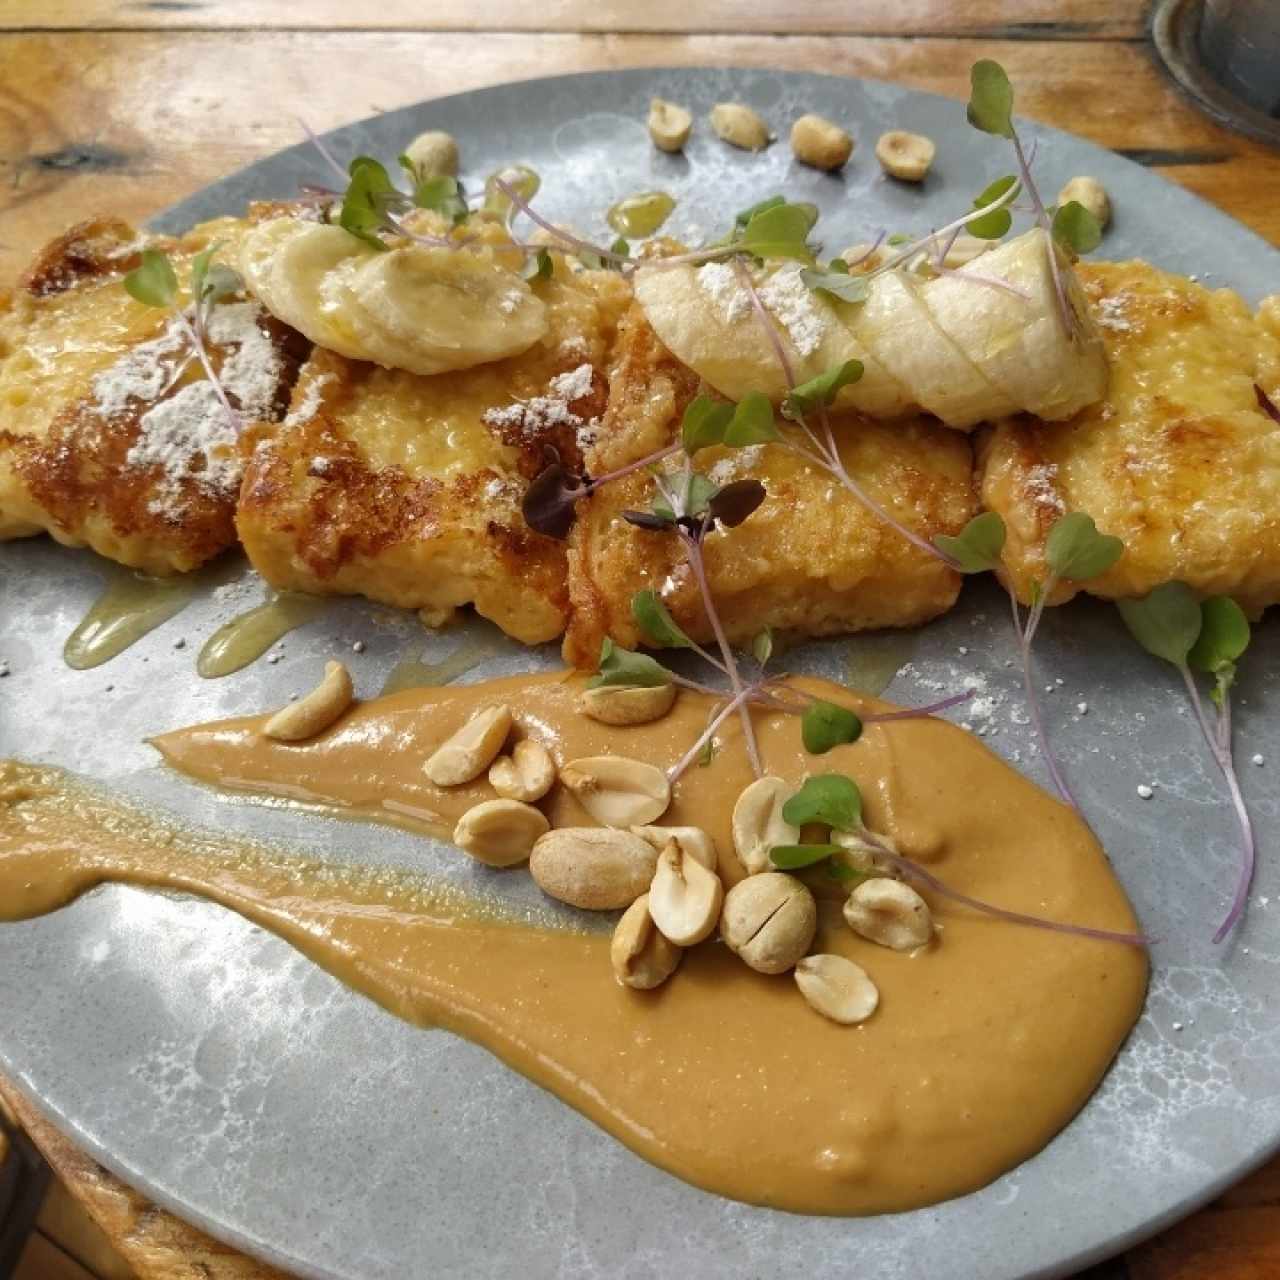 French Toast with banana and peanut butter